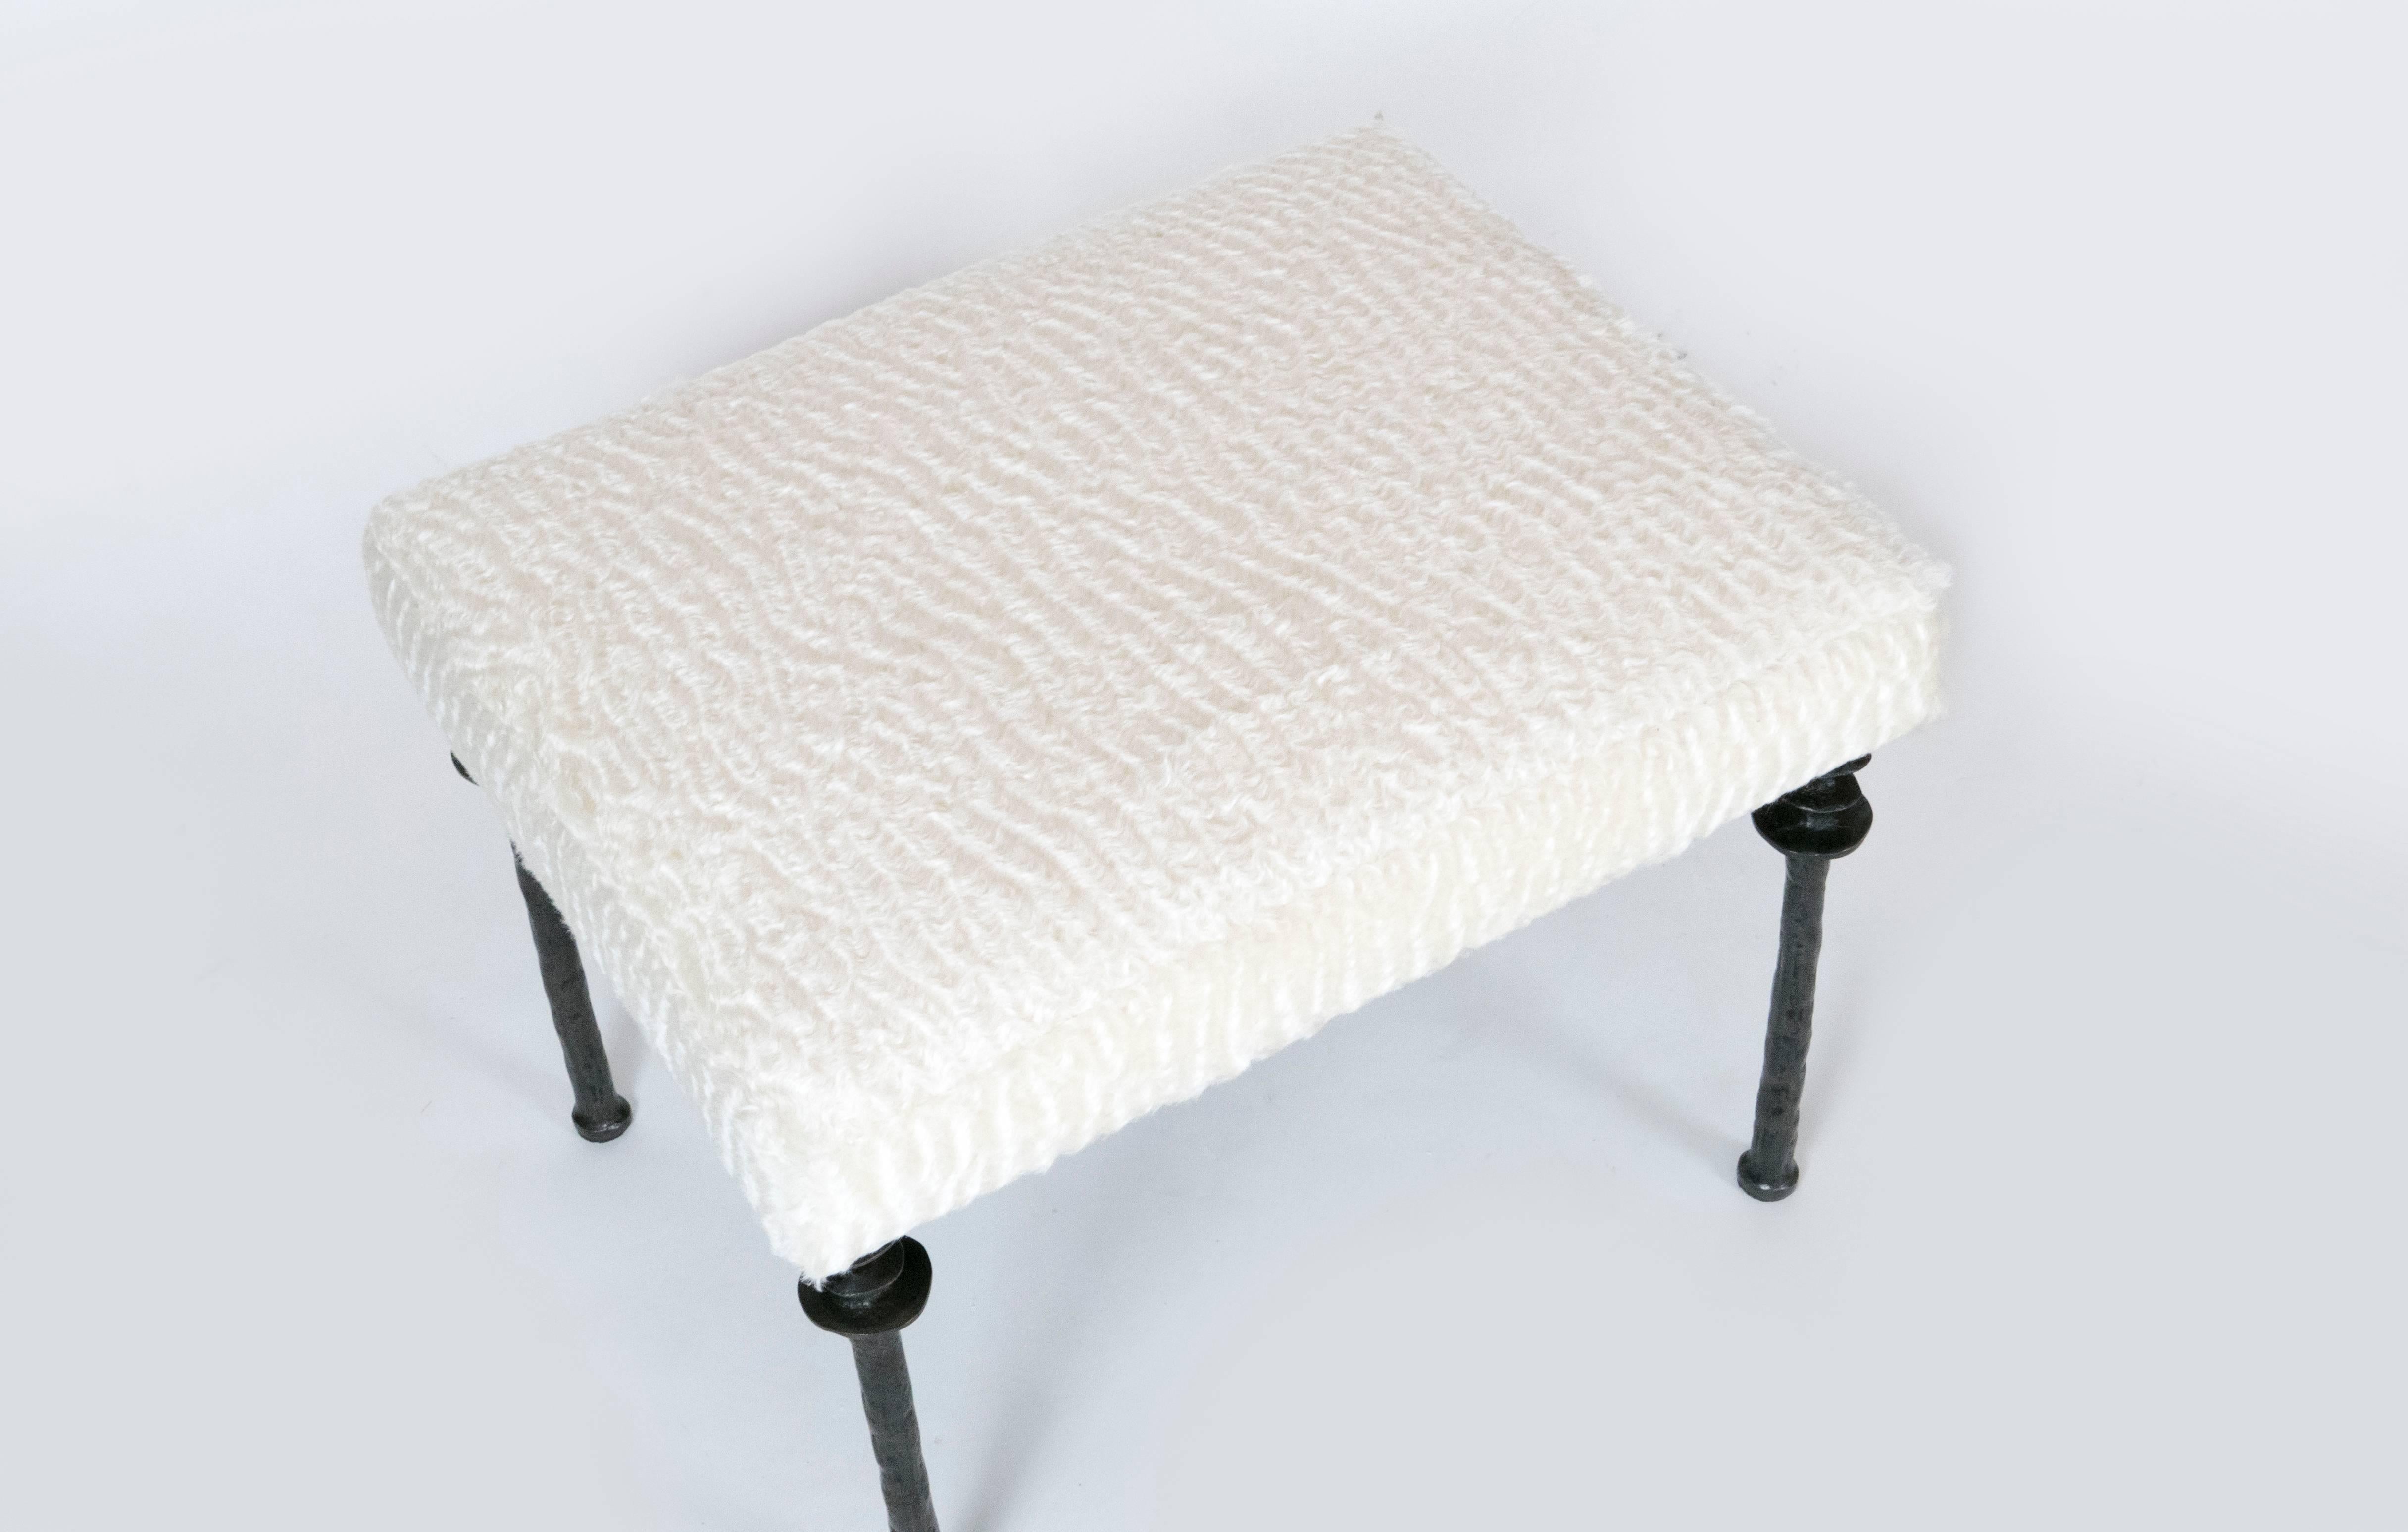 Two beautiful stools inspired by Diego Giacometti, these stools are ideal for
those who are looking for unique seating. Their cast bronze legs provide
a truely organic touch. The seat cushion has been upholstered in an off white faux fur. These